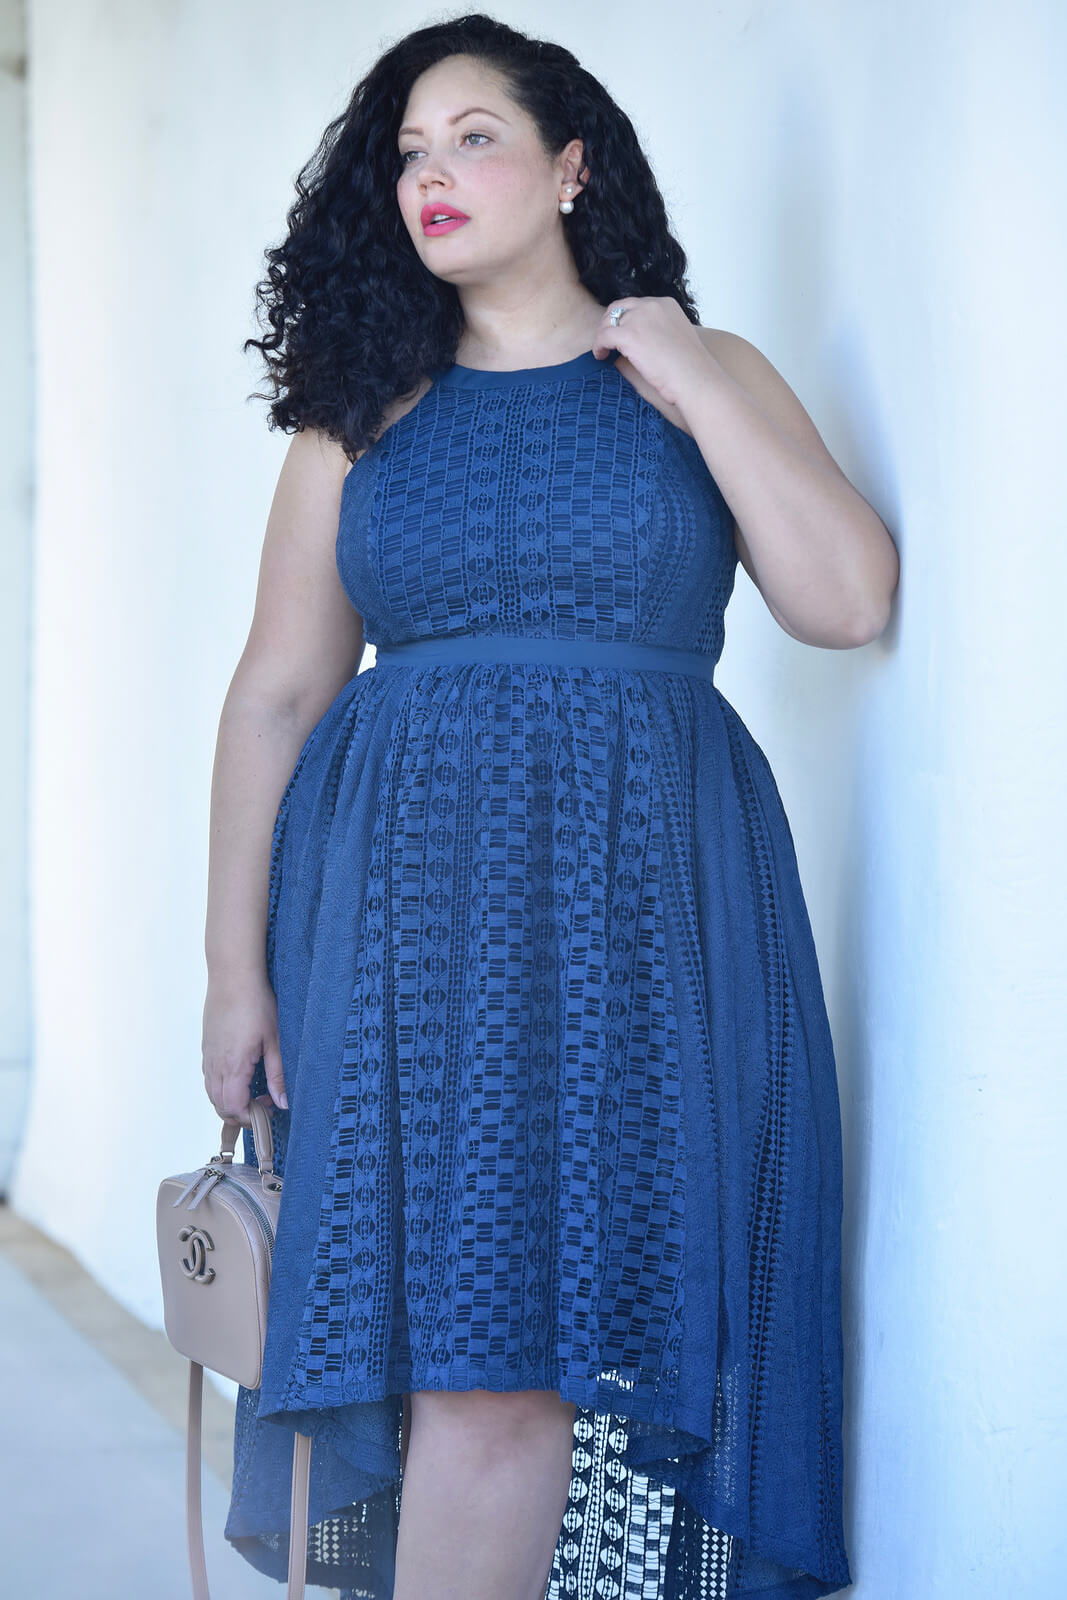 Lace high low dress by modcloth, wedding outfit, Chanel bag, Celine sunglasses, lipstick by Nars via @GirlWithCurves